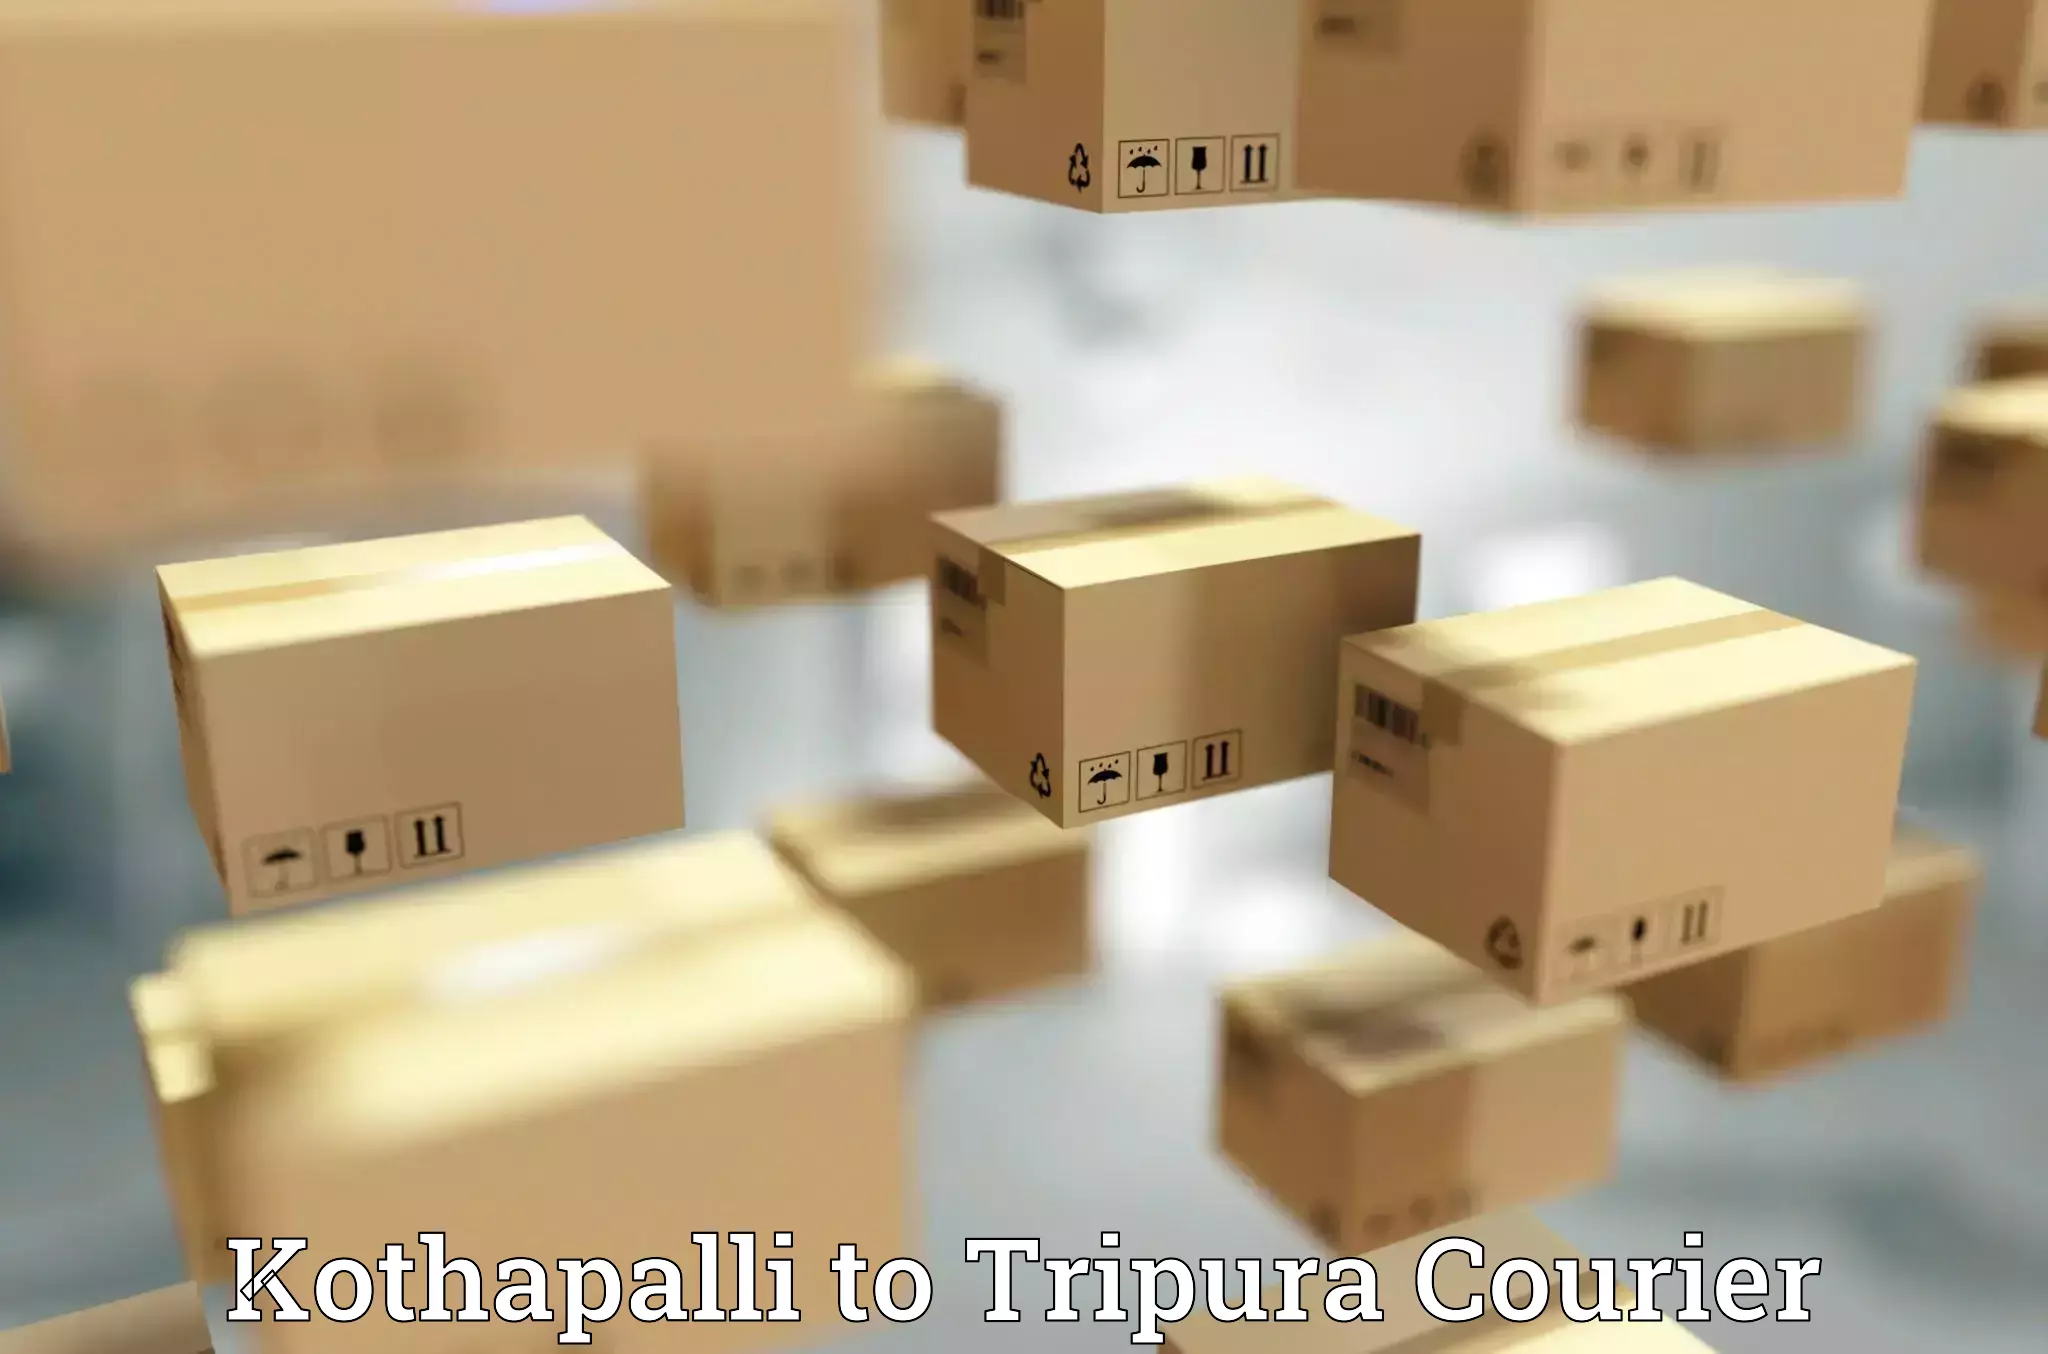 Rural area delivery Kothapalli to Tripura